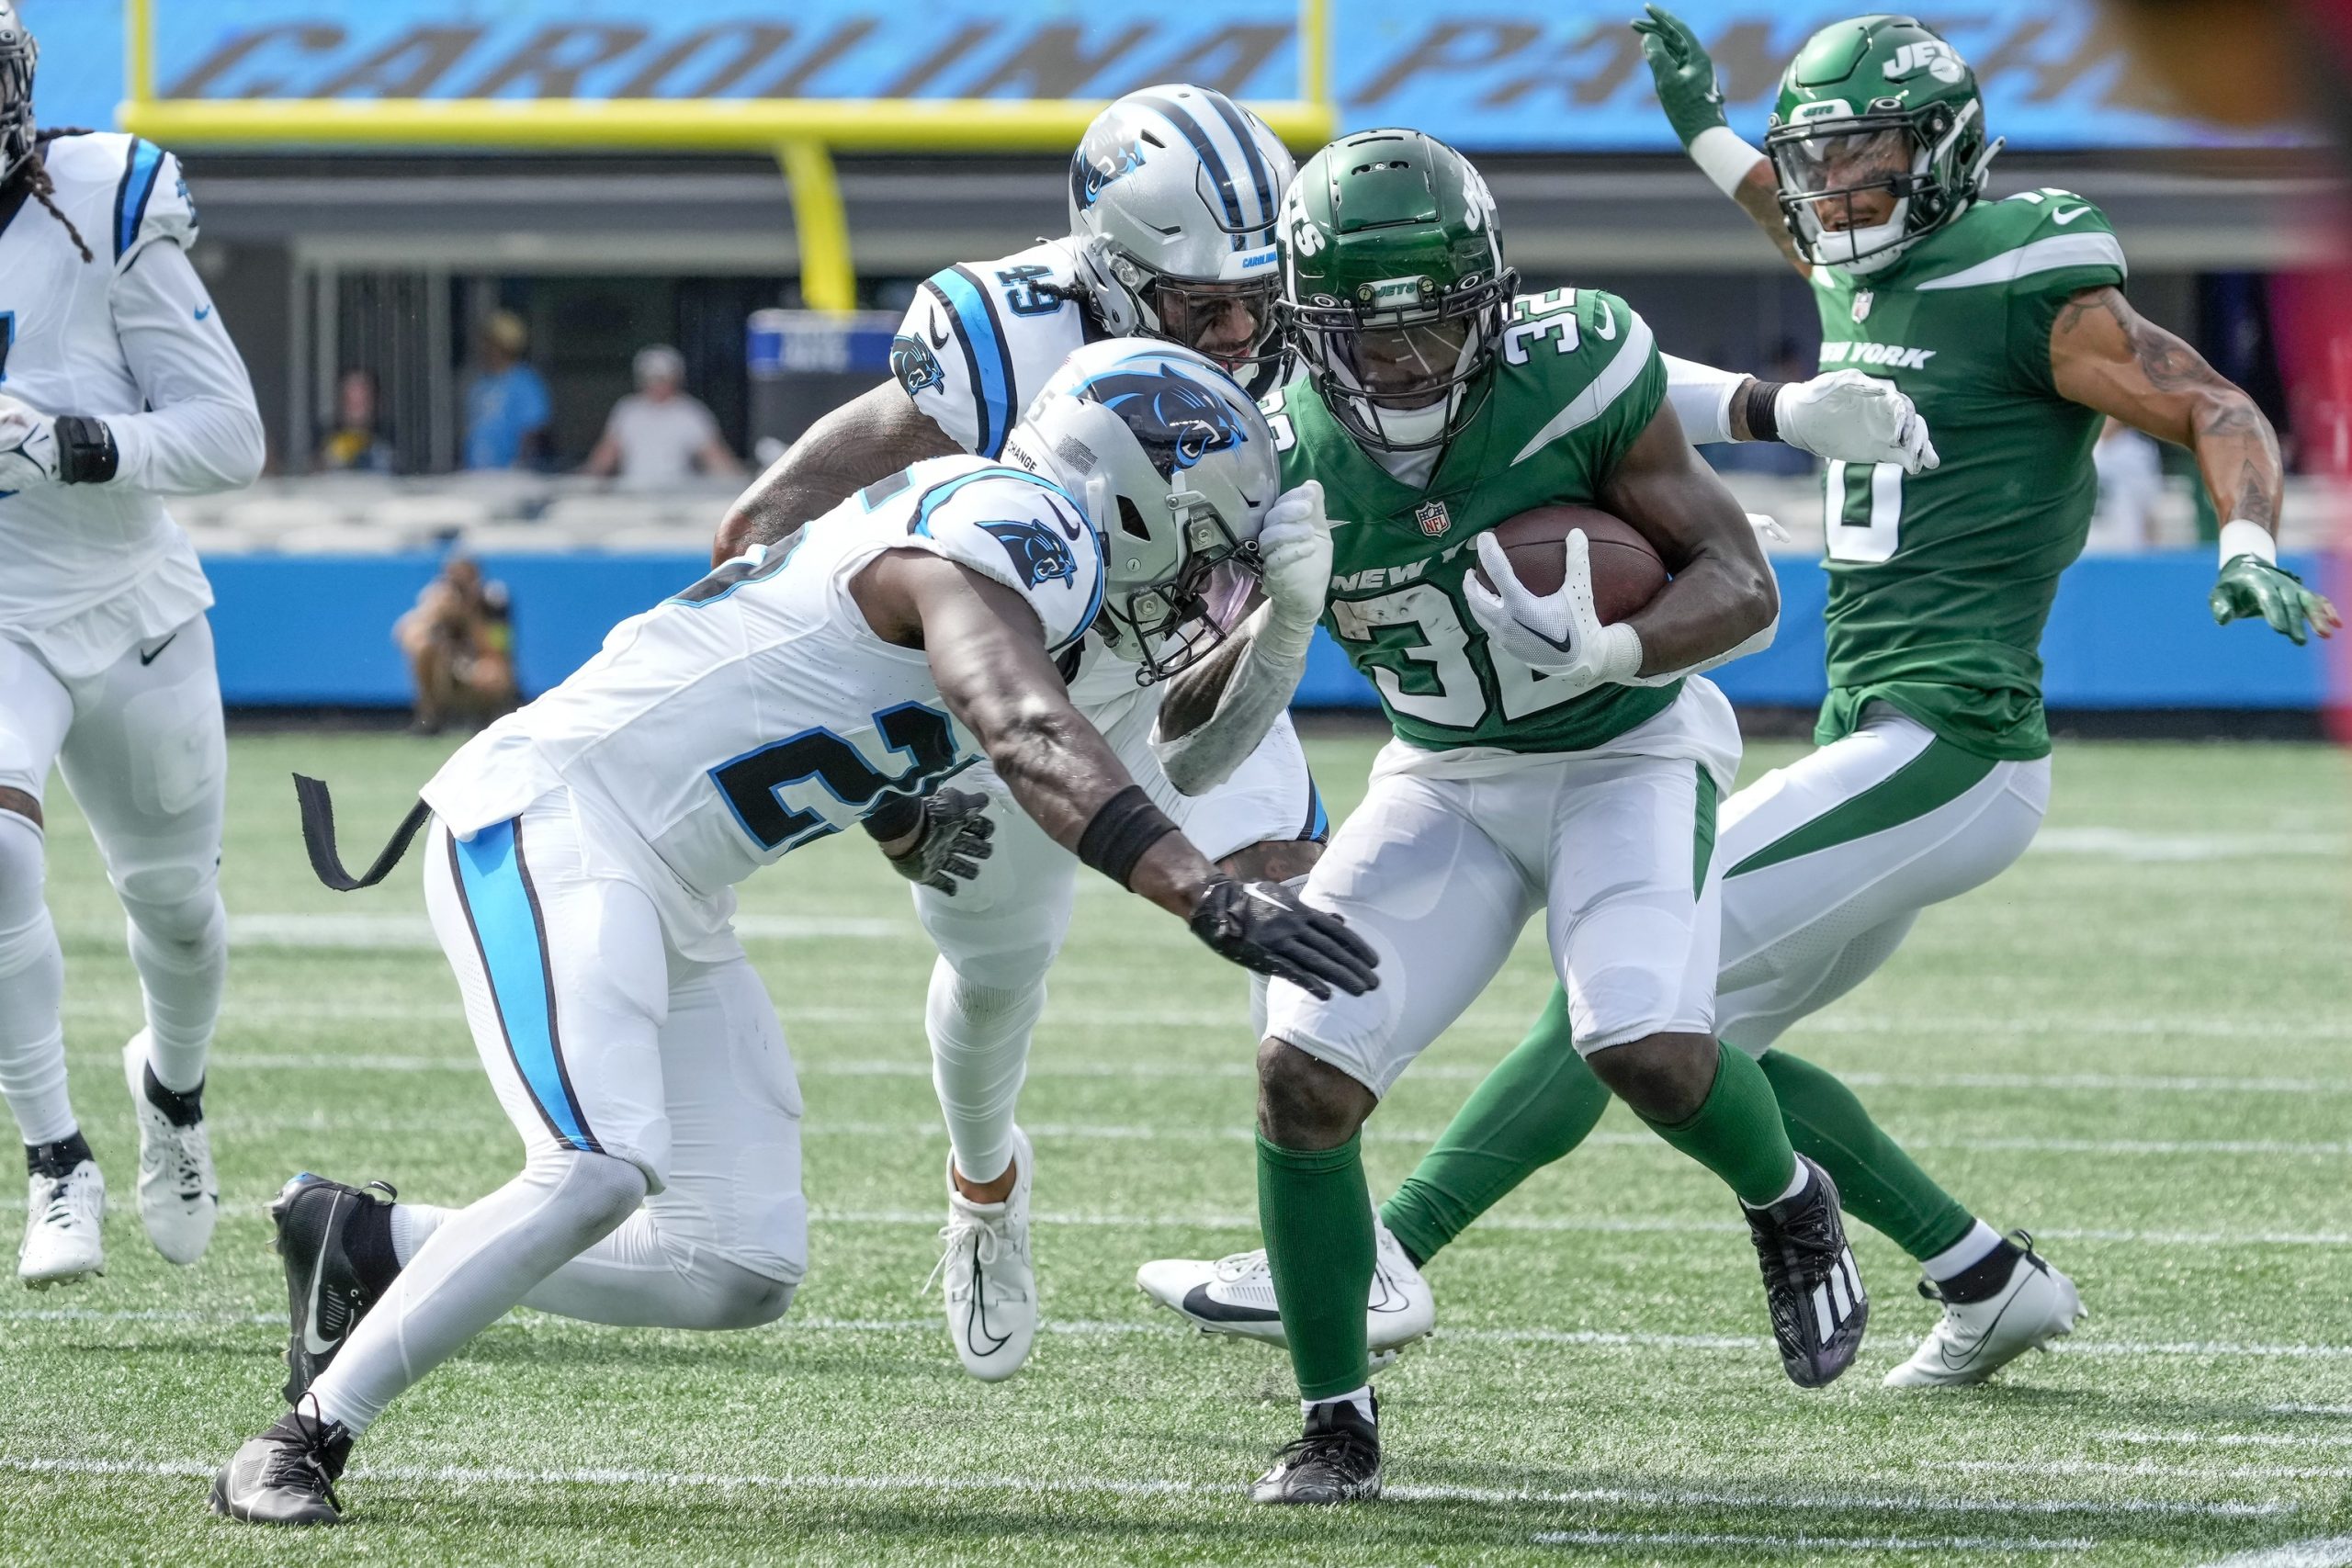 Jets could be without RB Michael Carter vs. Vikings